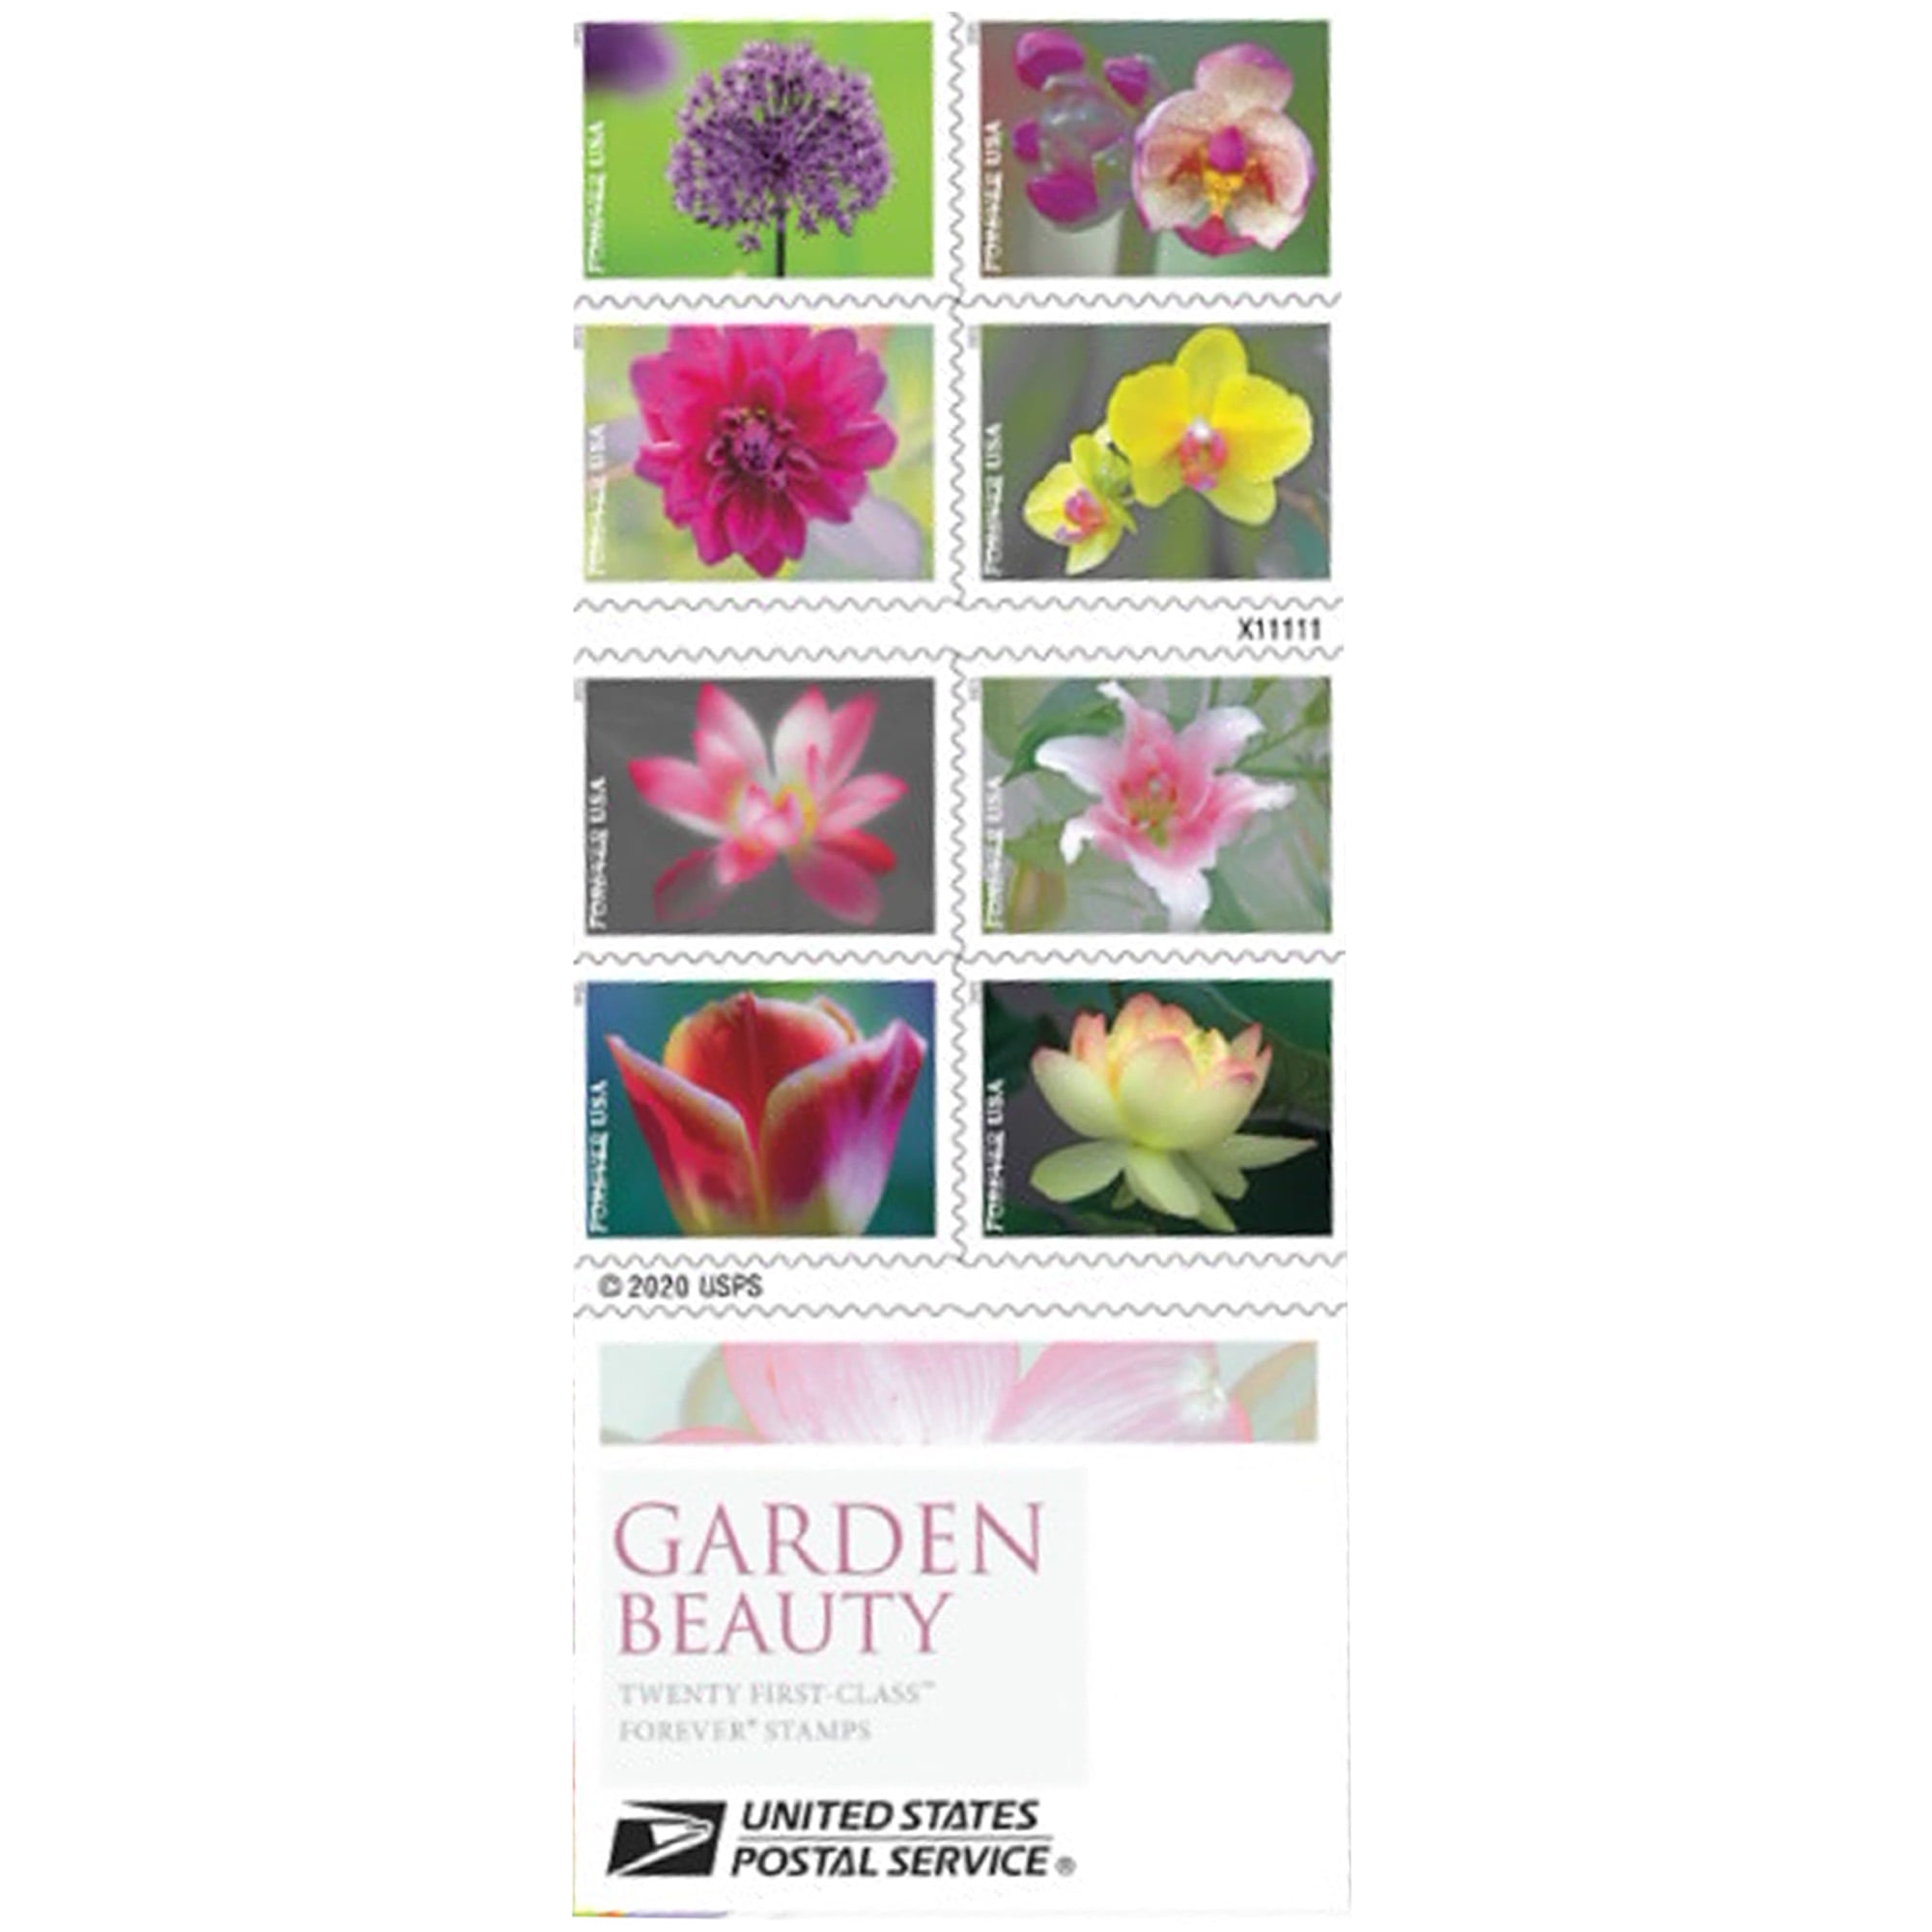 USPS Garden Beauty Forever Postage Stamps Book of 20 Self-Stick First Class Wedding Celebration Anniversary Flower Party (20 Stamps)